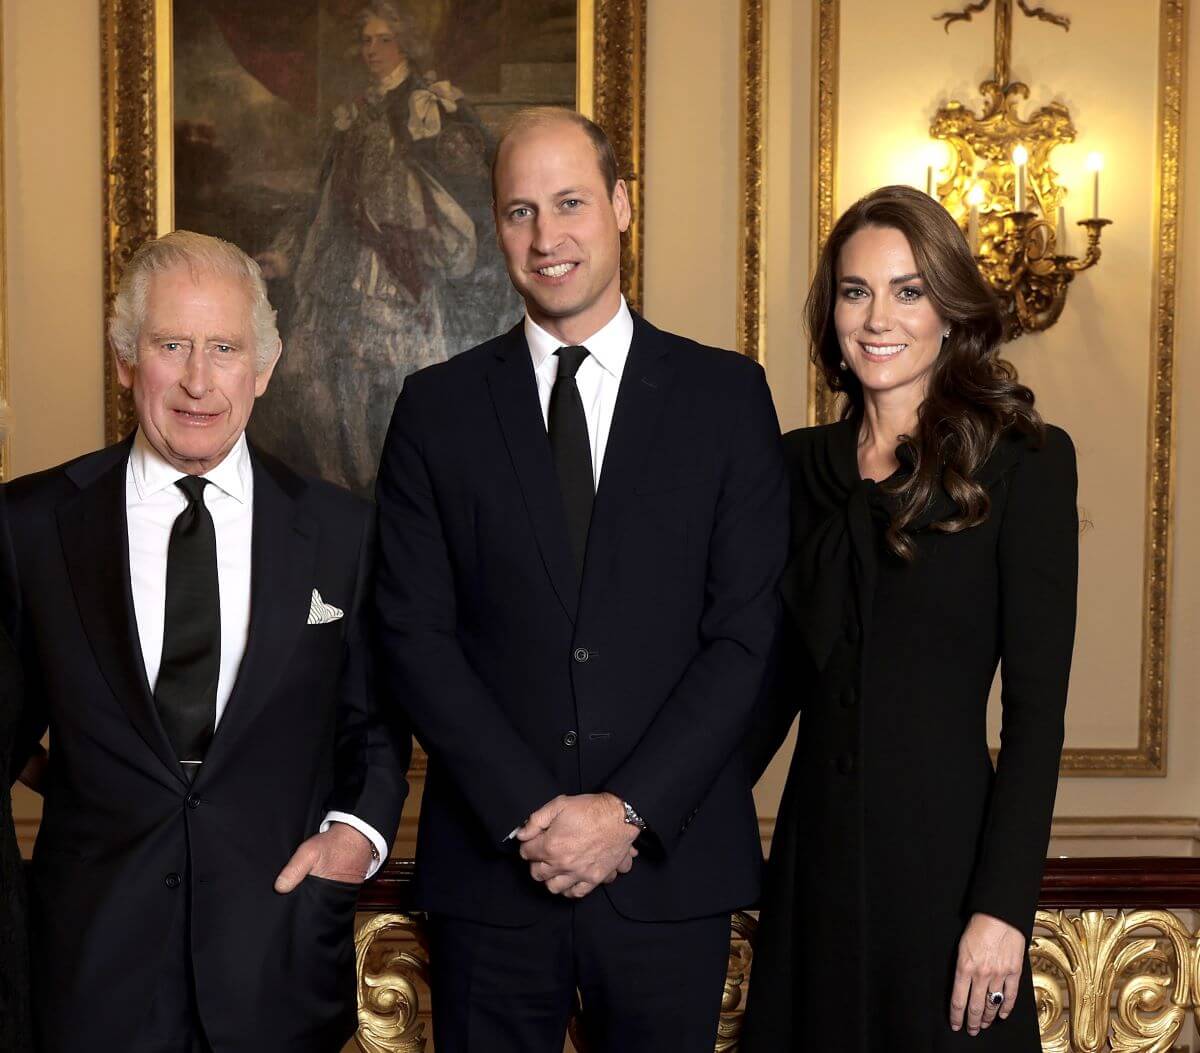 King Charles III, Prince William, and Kate Middleton pose for a photo ahead of reception for Heads of State and Official Overseas Guests at Buckingham Palace